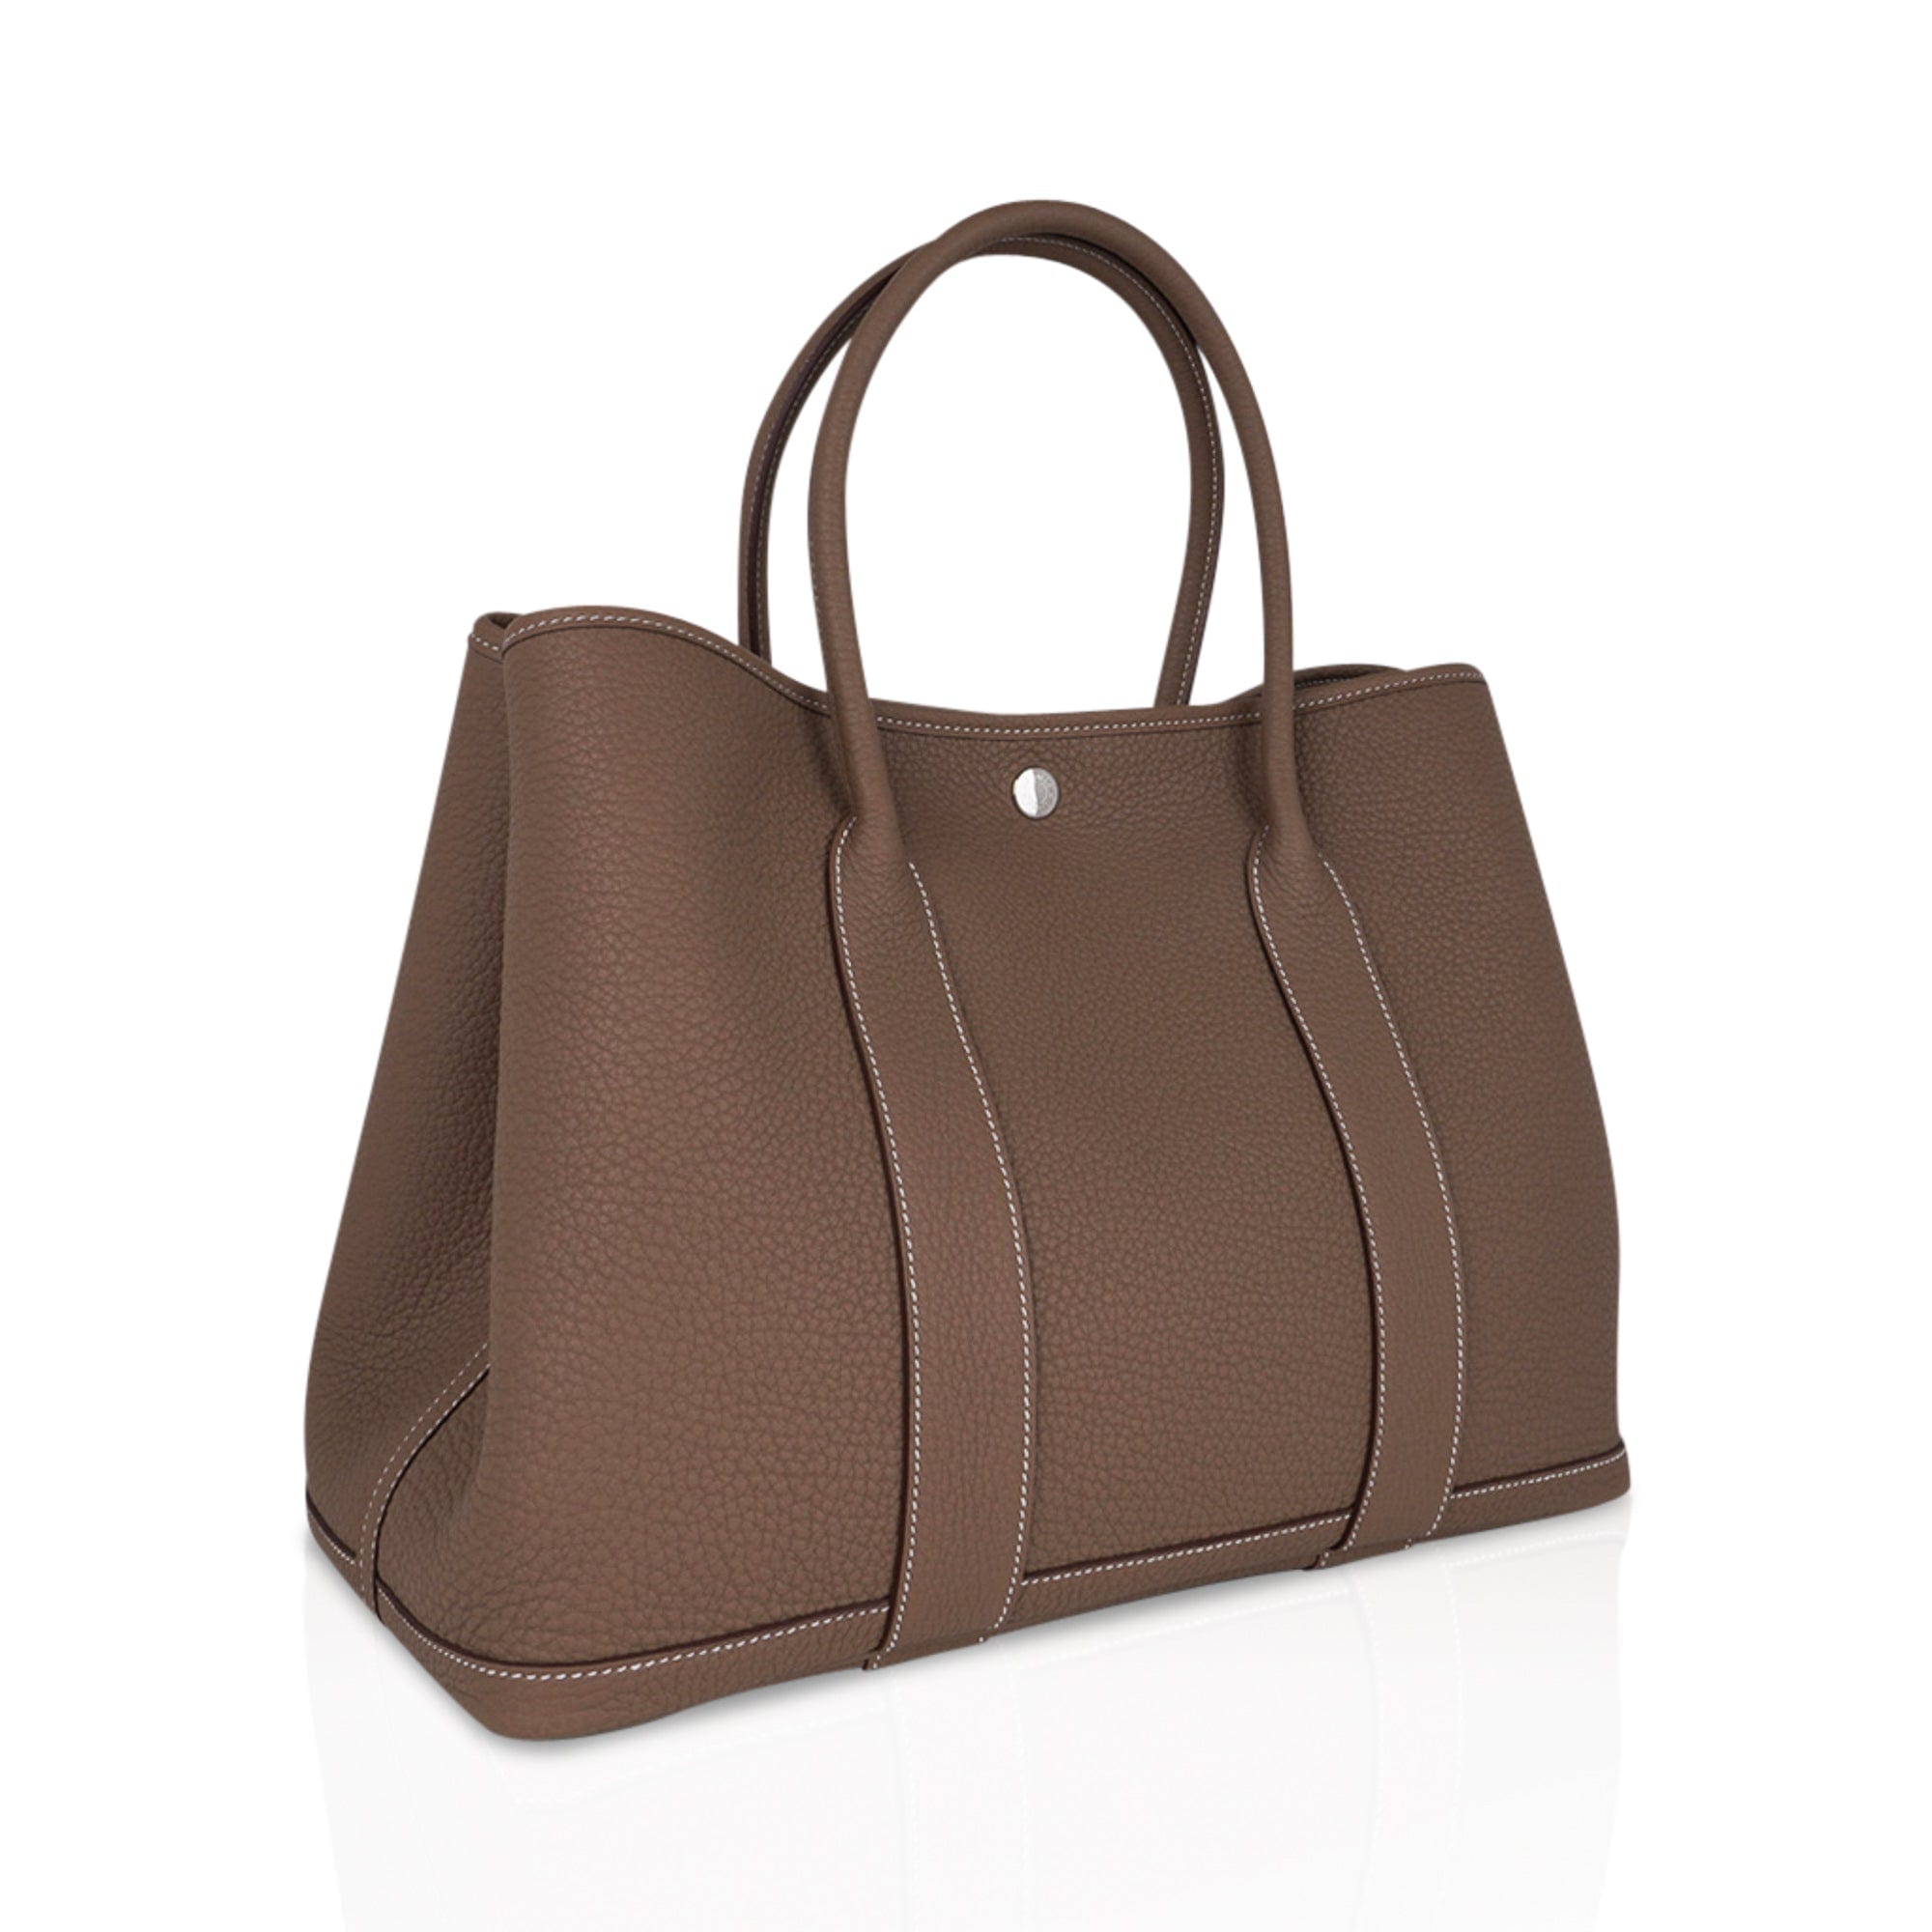 San Maries Geuine Leather Garden Party Tote Bag